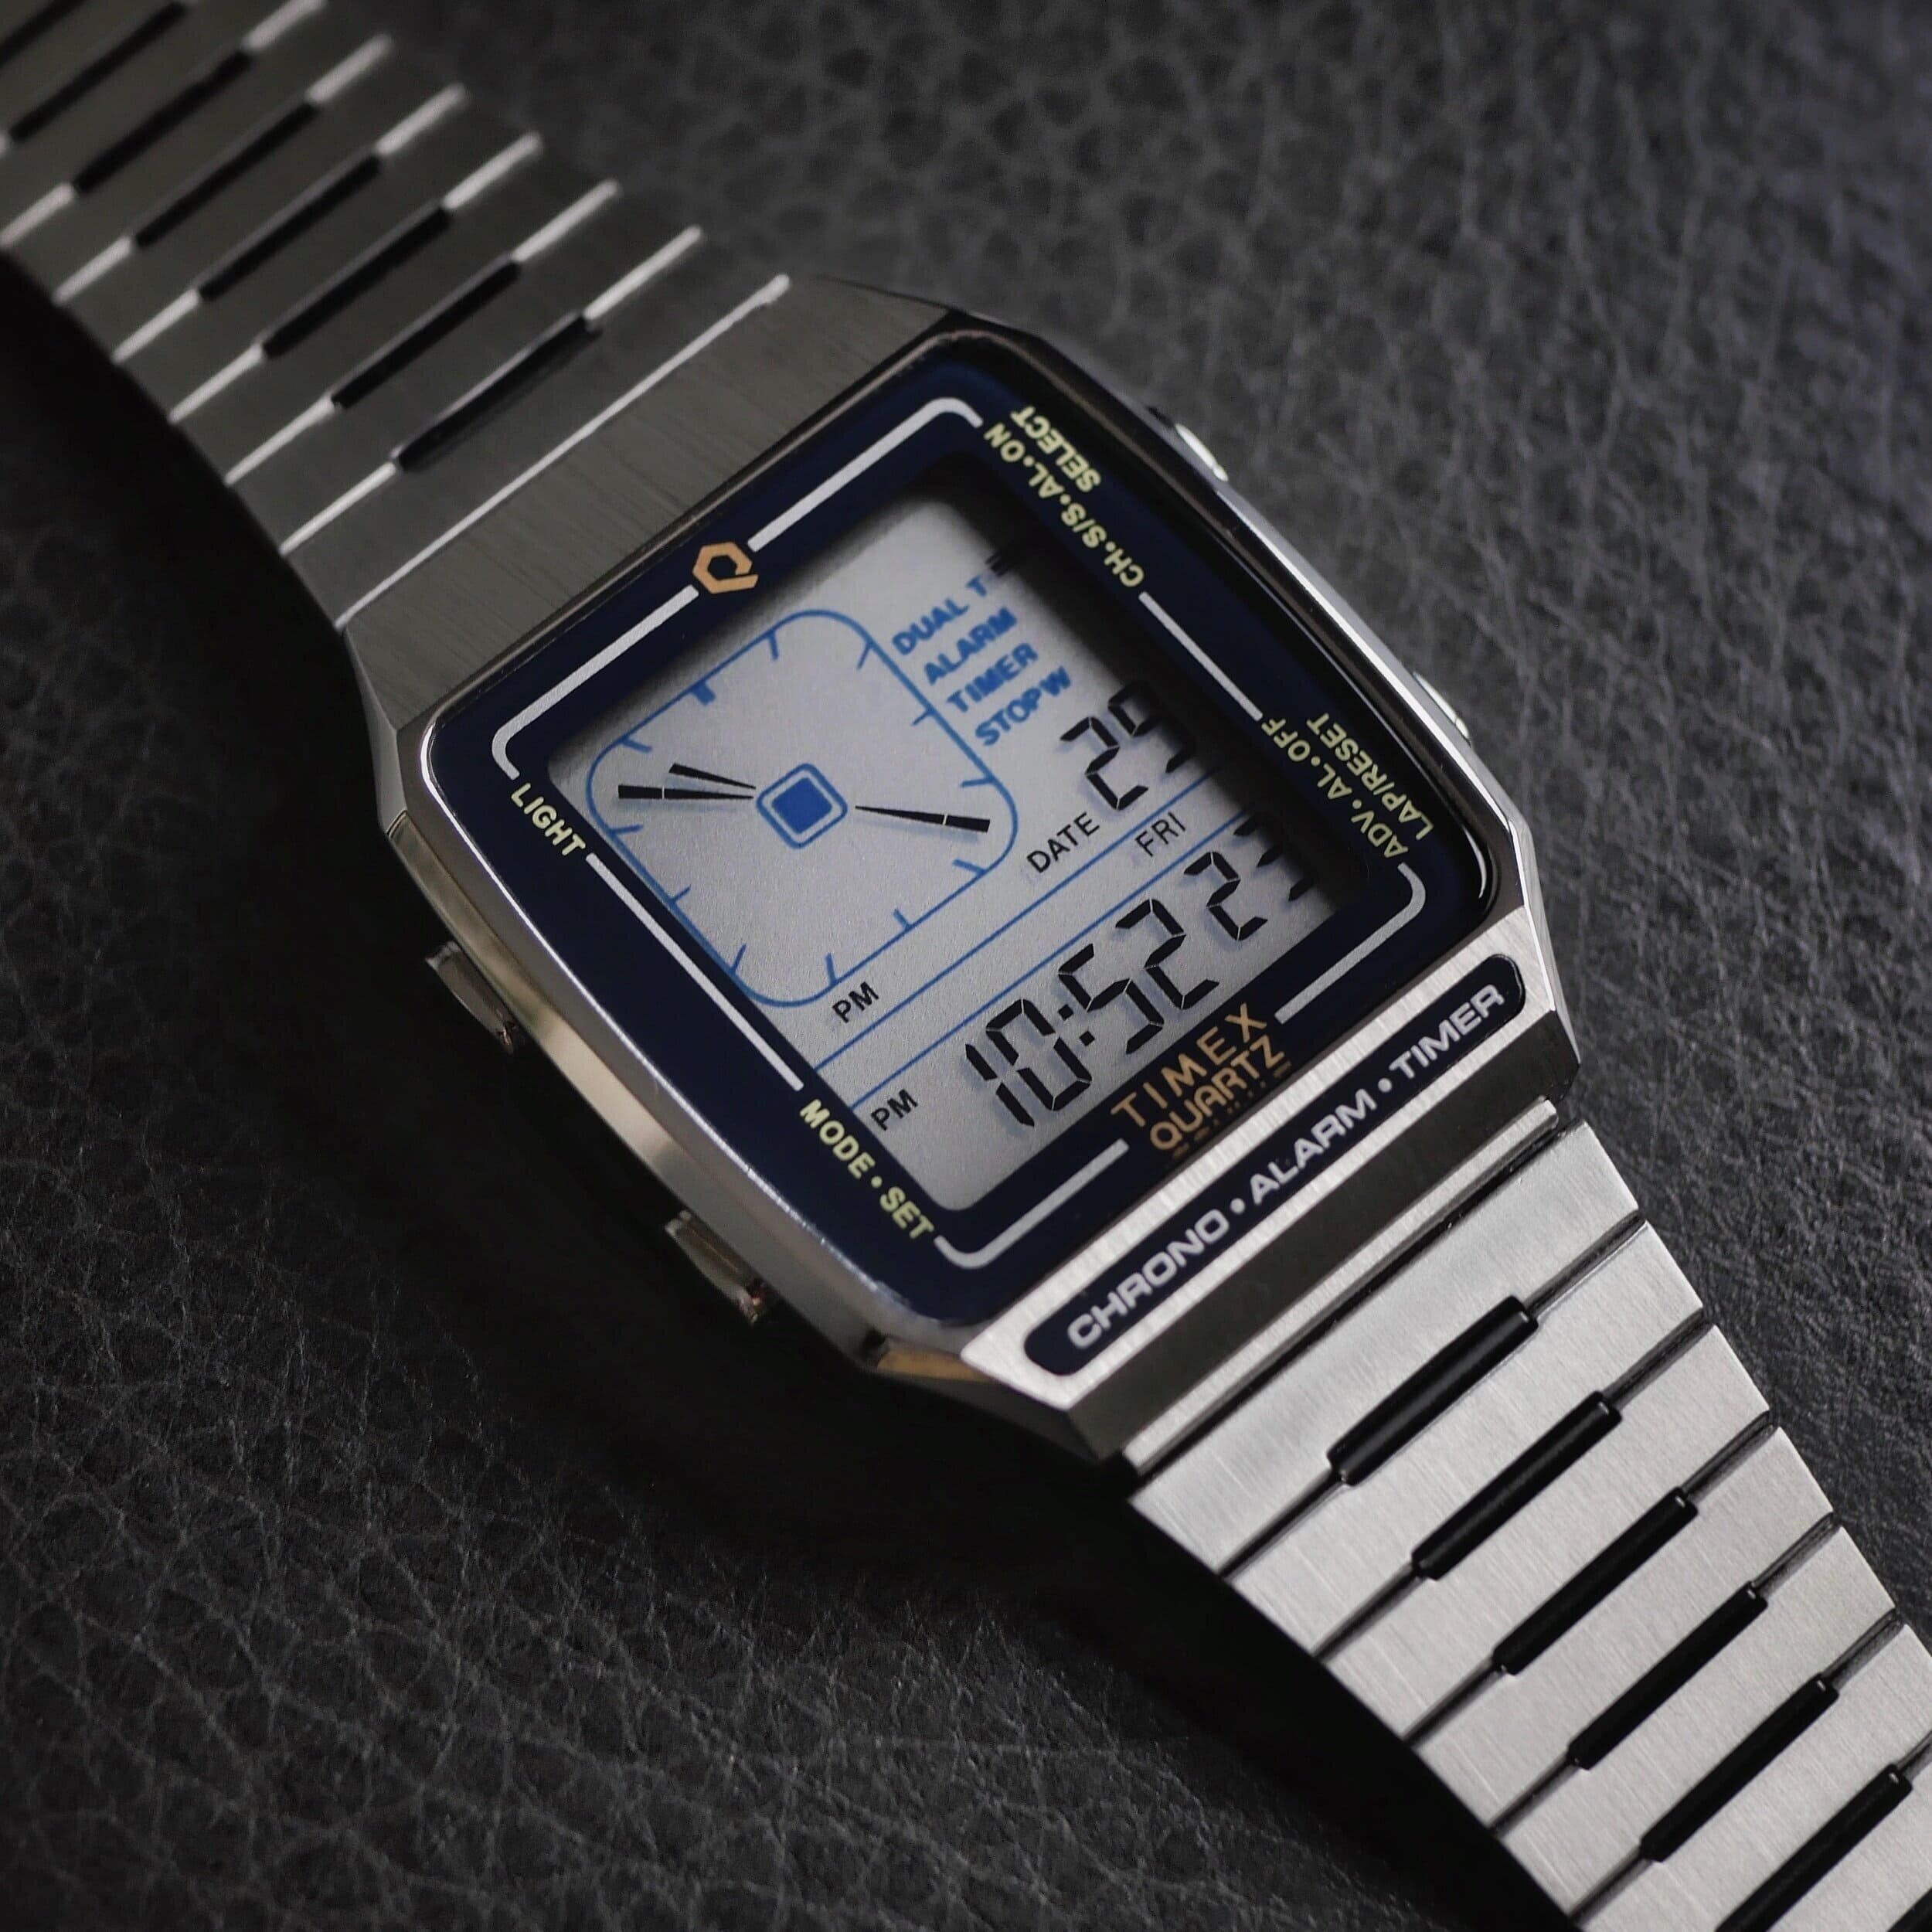 Timex Q LCA Watch Review: Is It the Best Retro Watch Under $200 